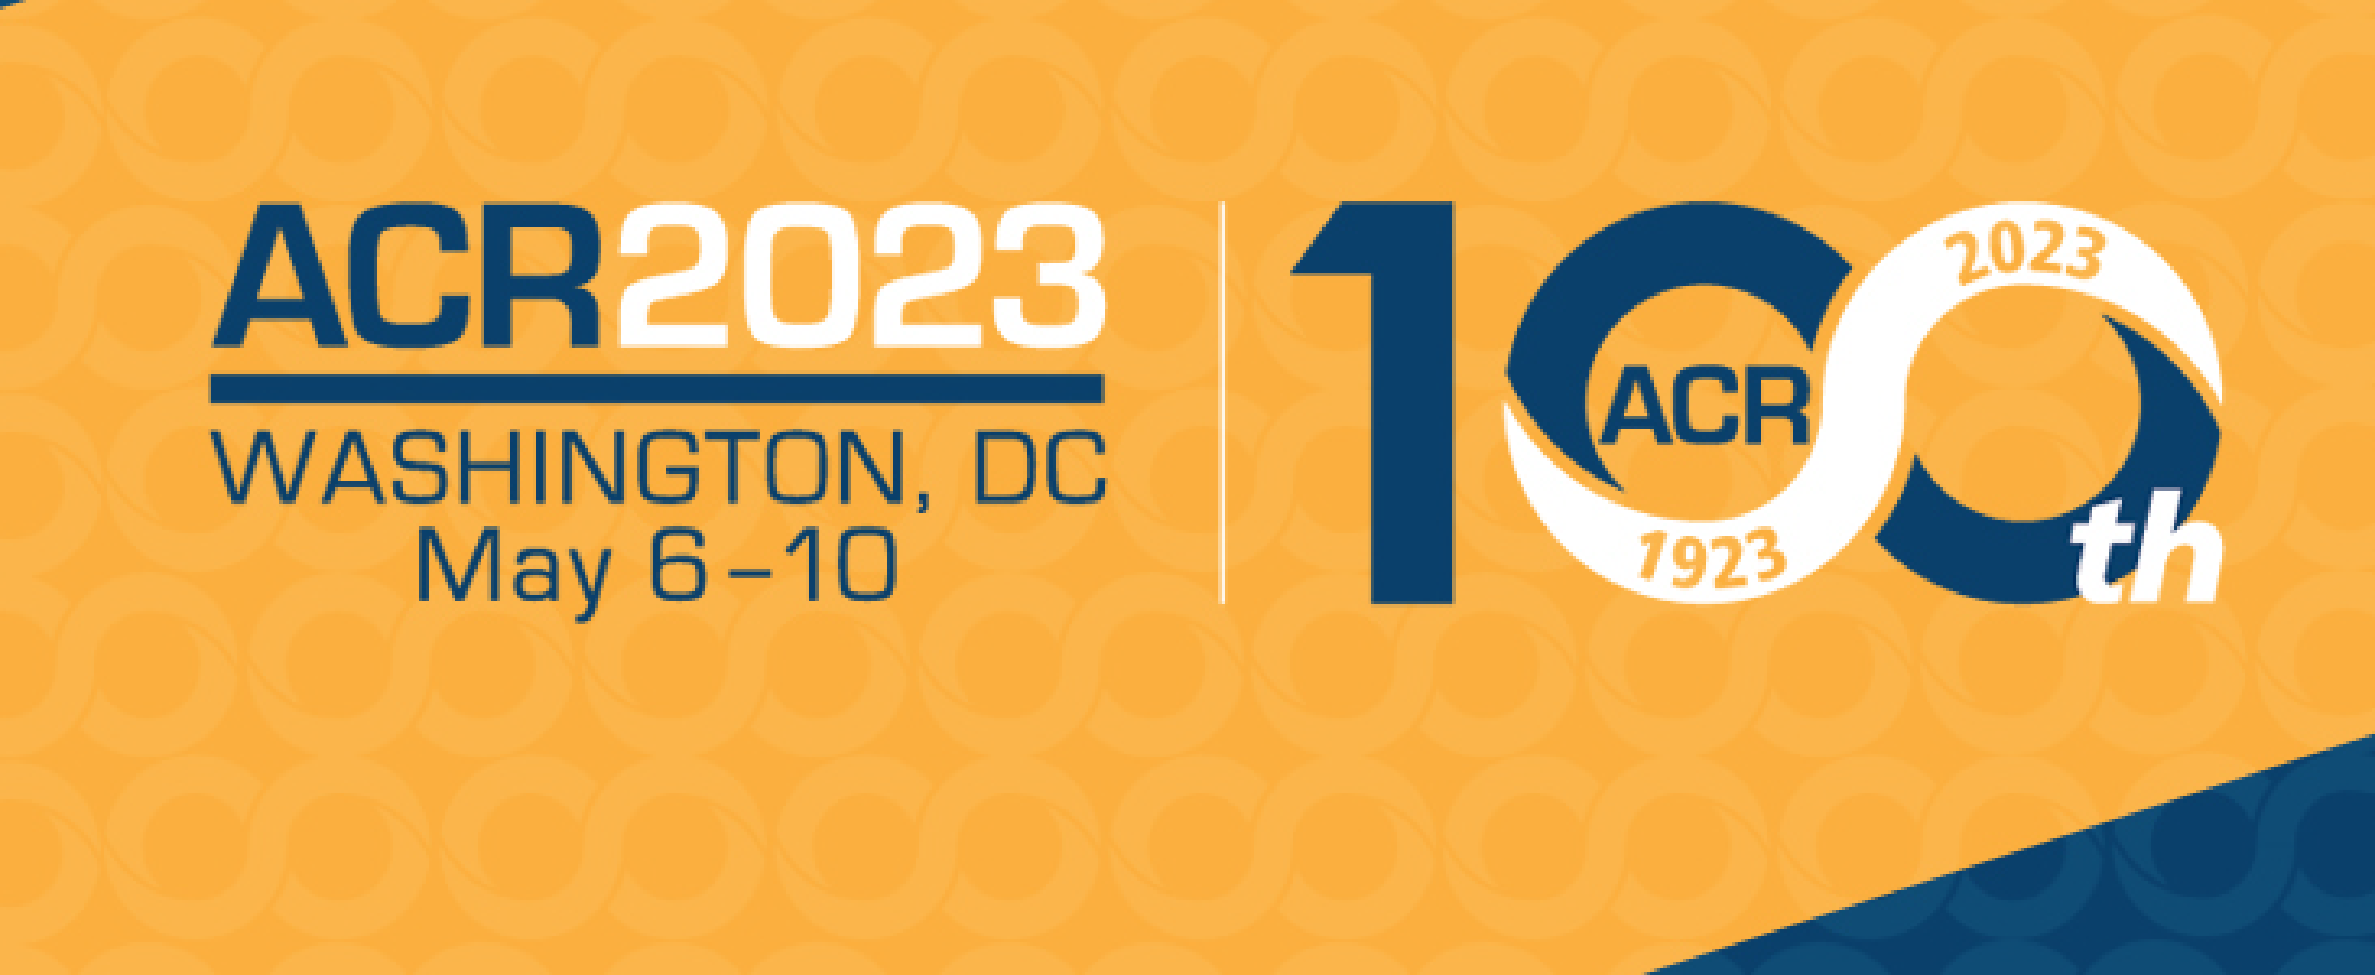 American College of Radiology Annual Meeting - ACR 2023